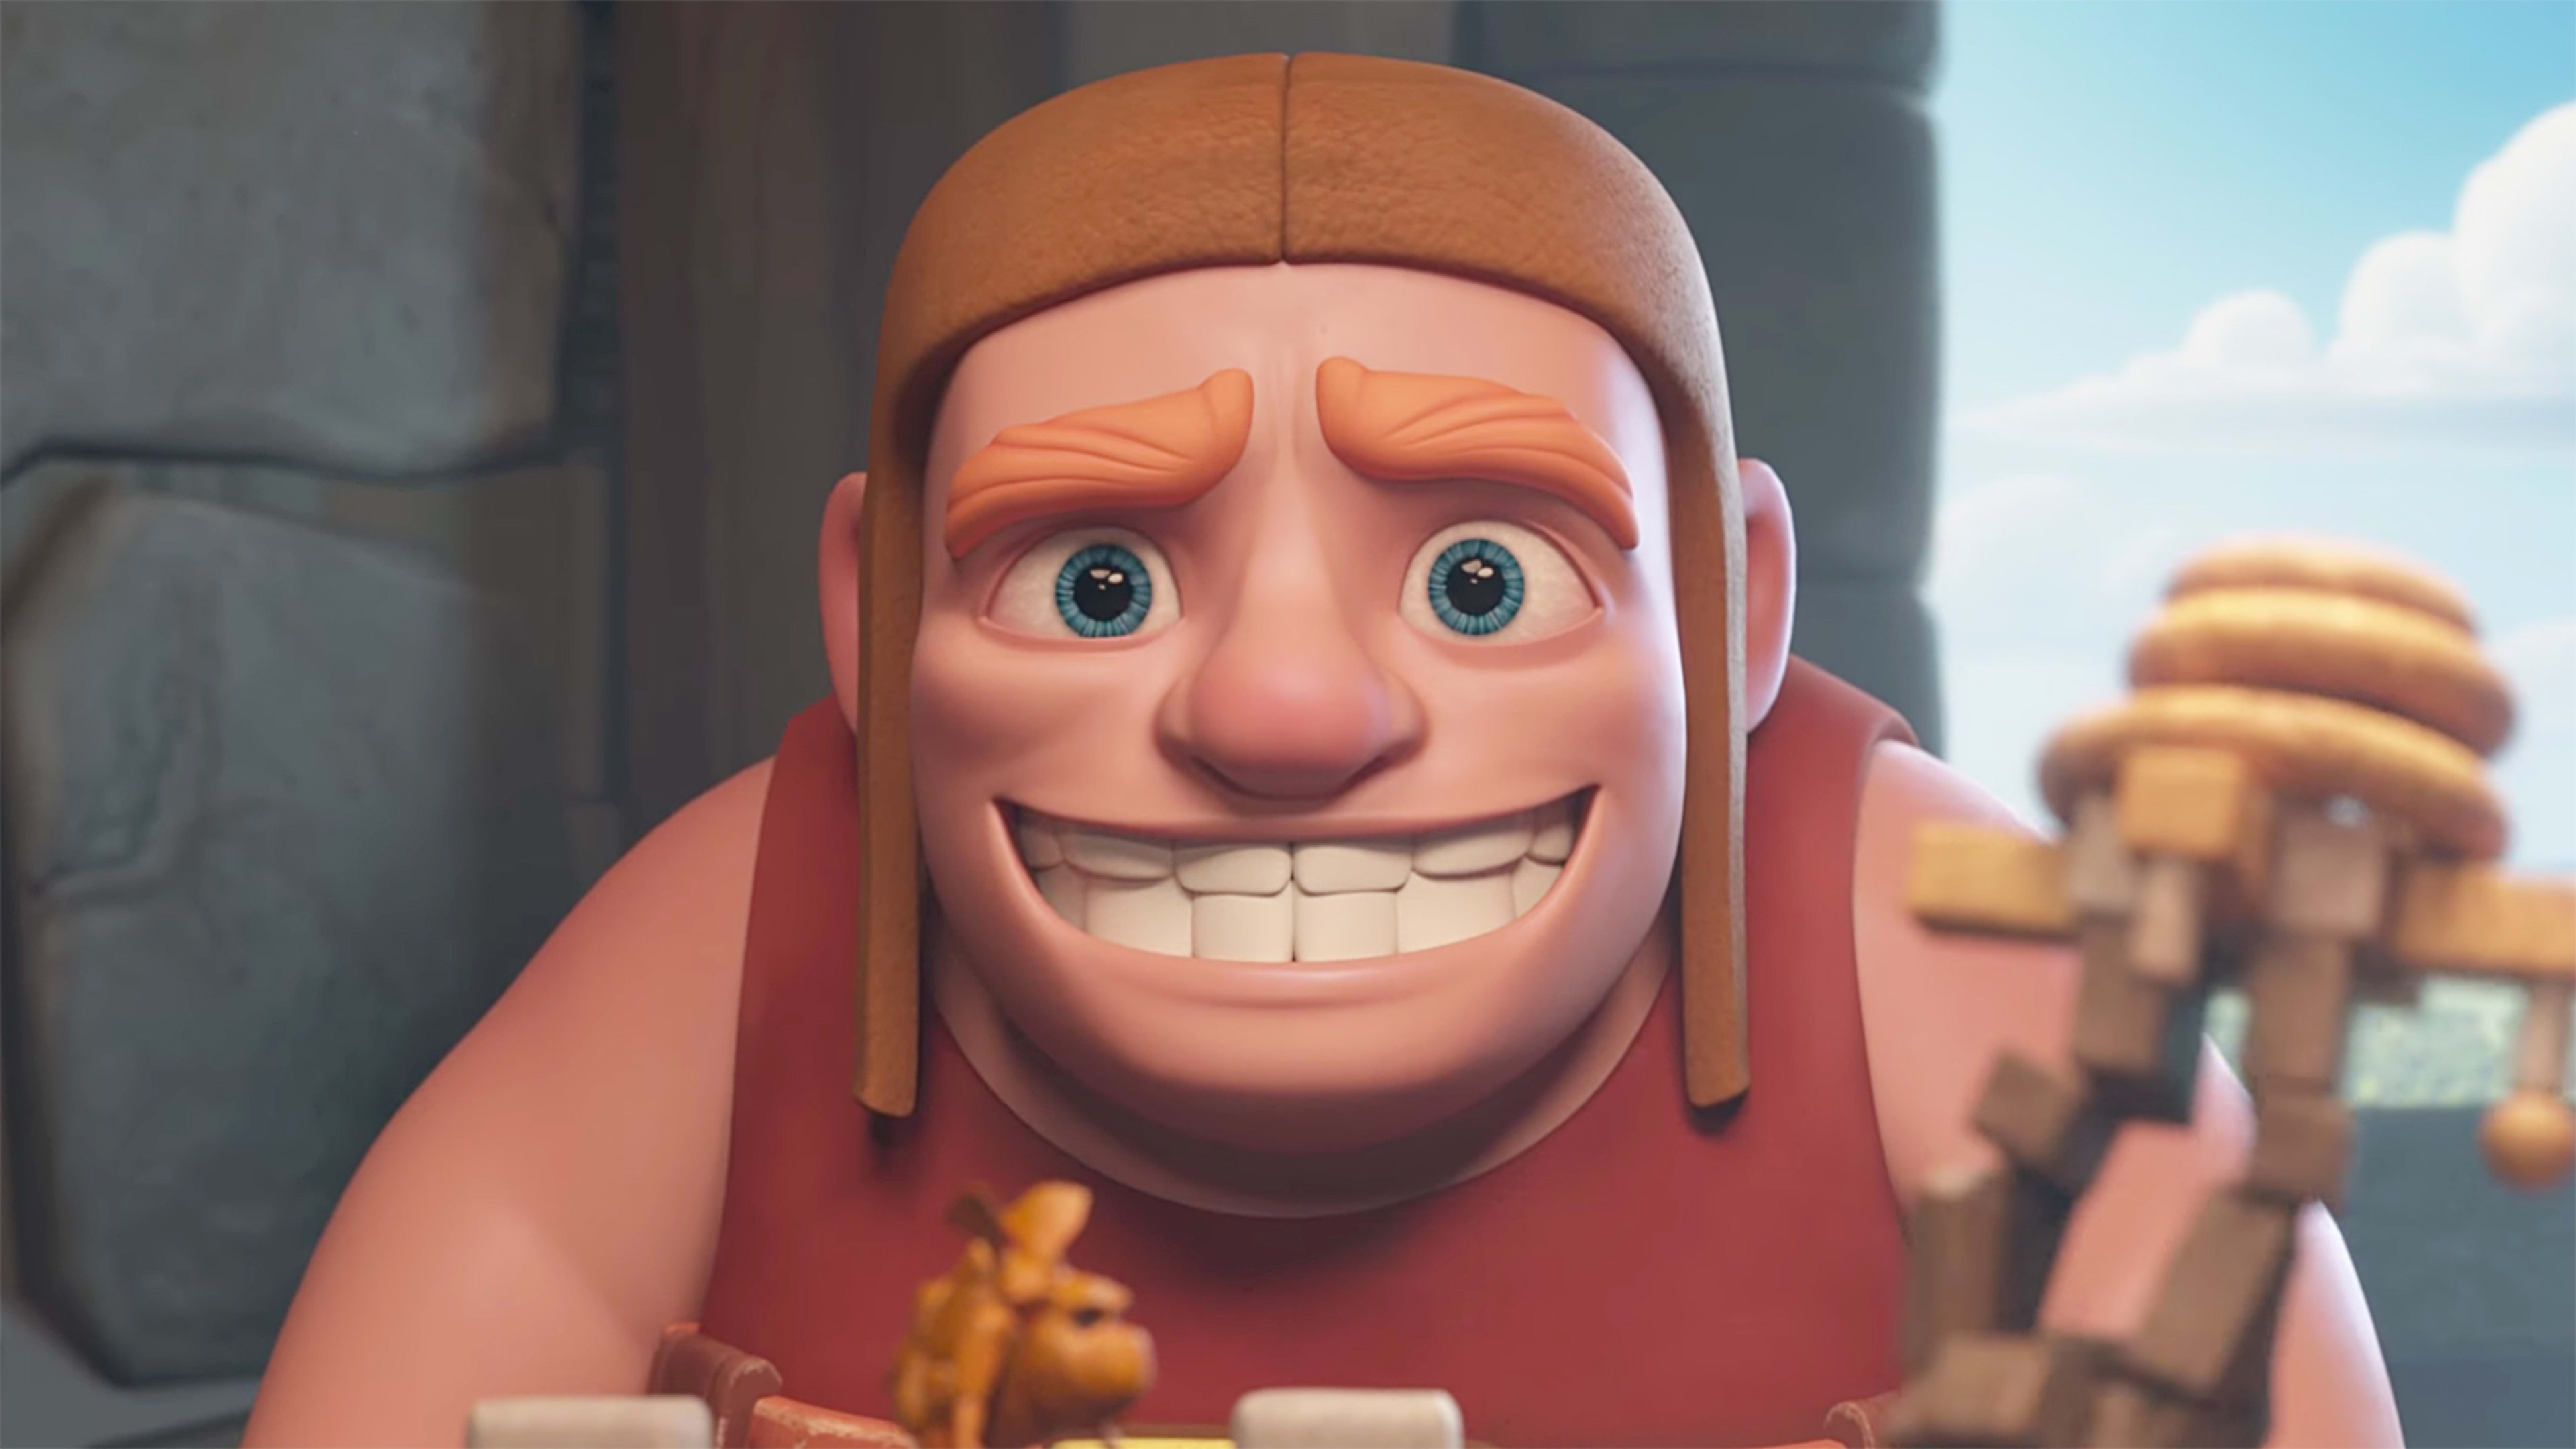 Why Supercell Brought The Builder From “Clash Of Clans” Into The Real World